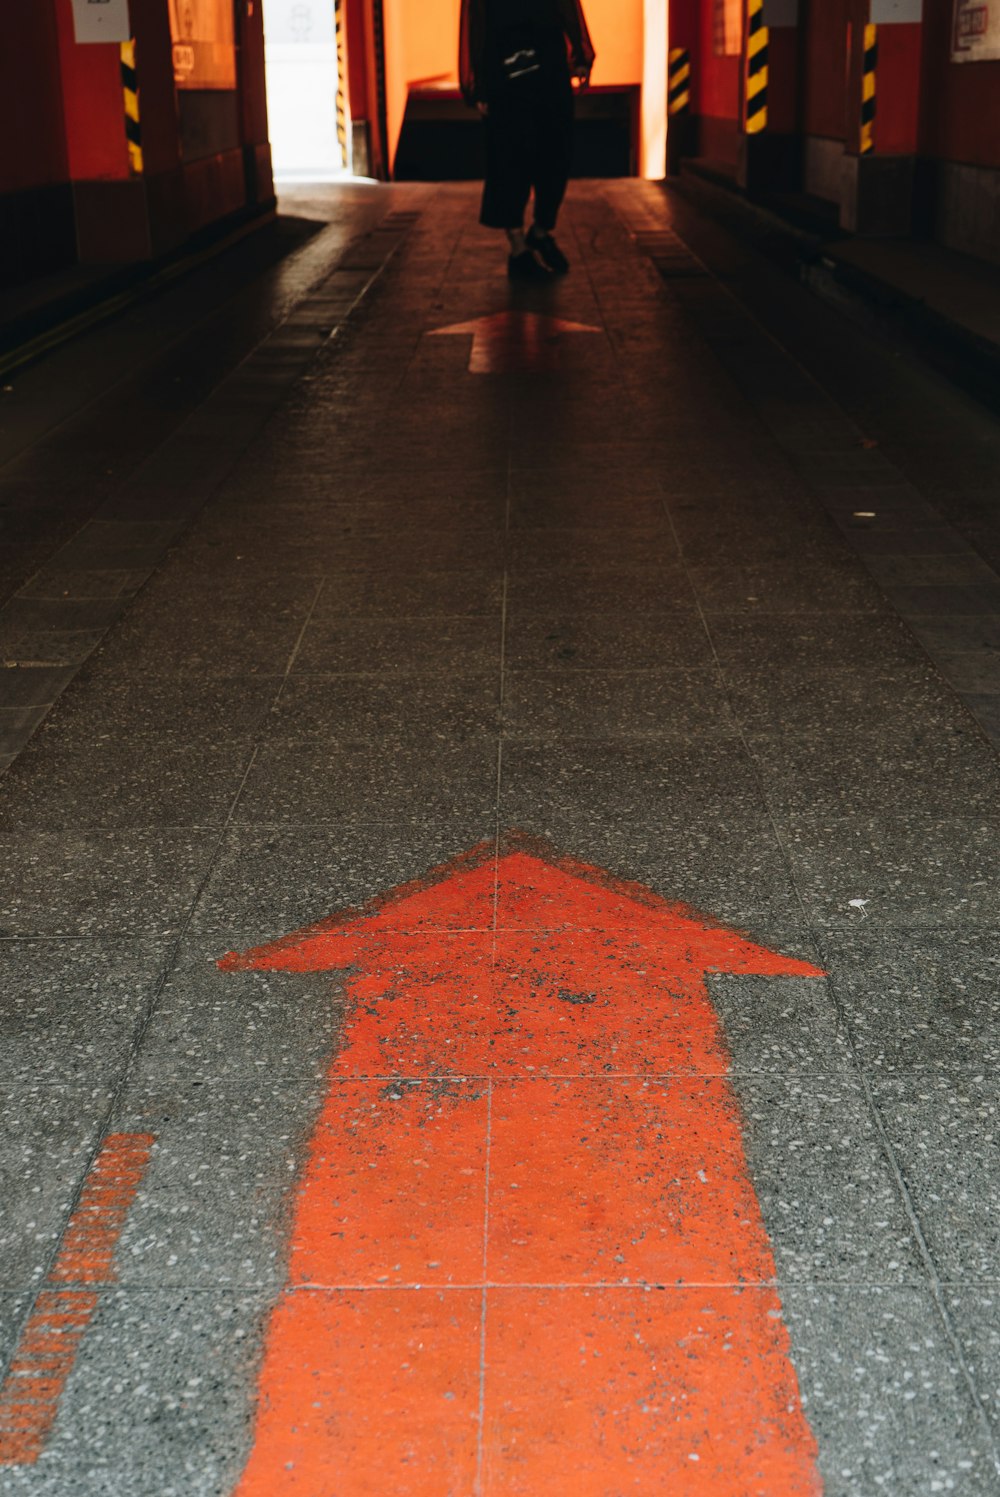 a person walking down a hallway with an arrow painted on the floor